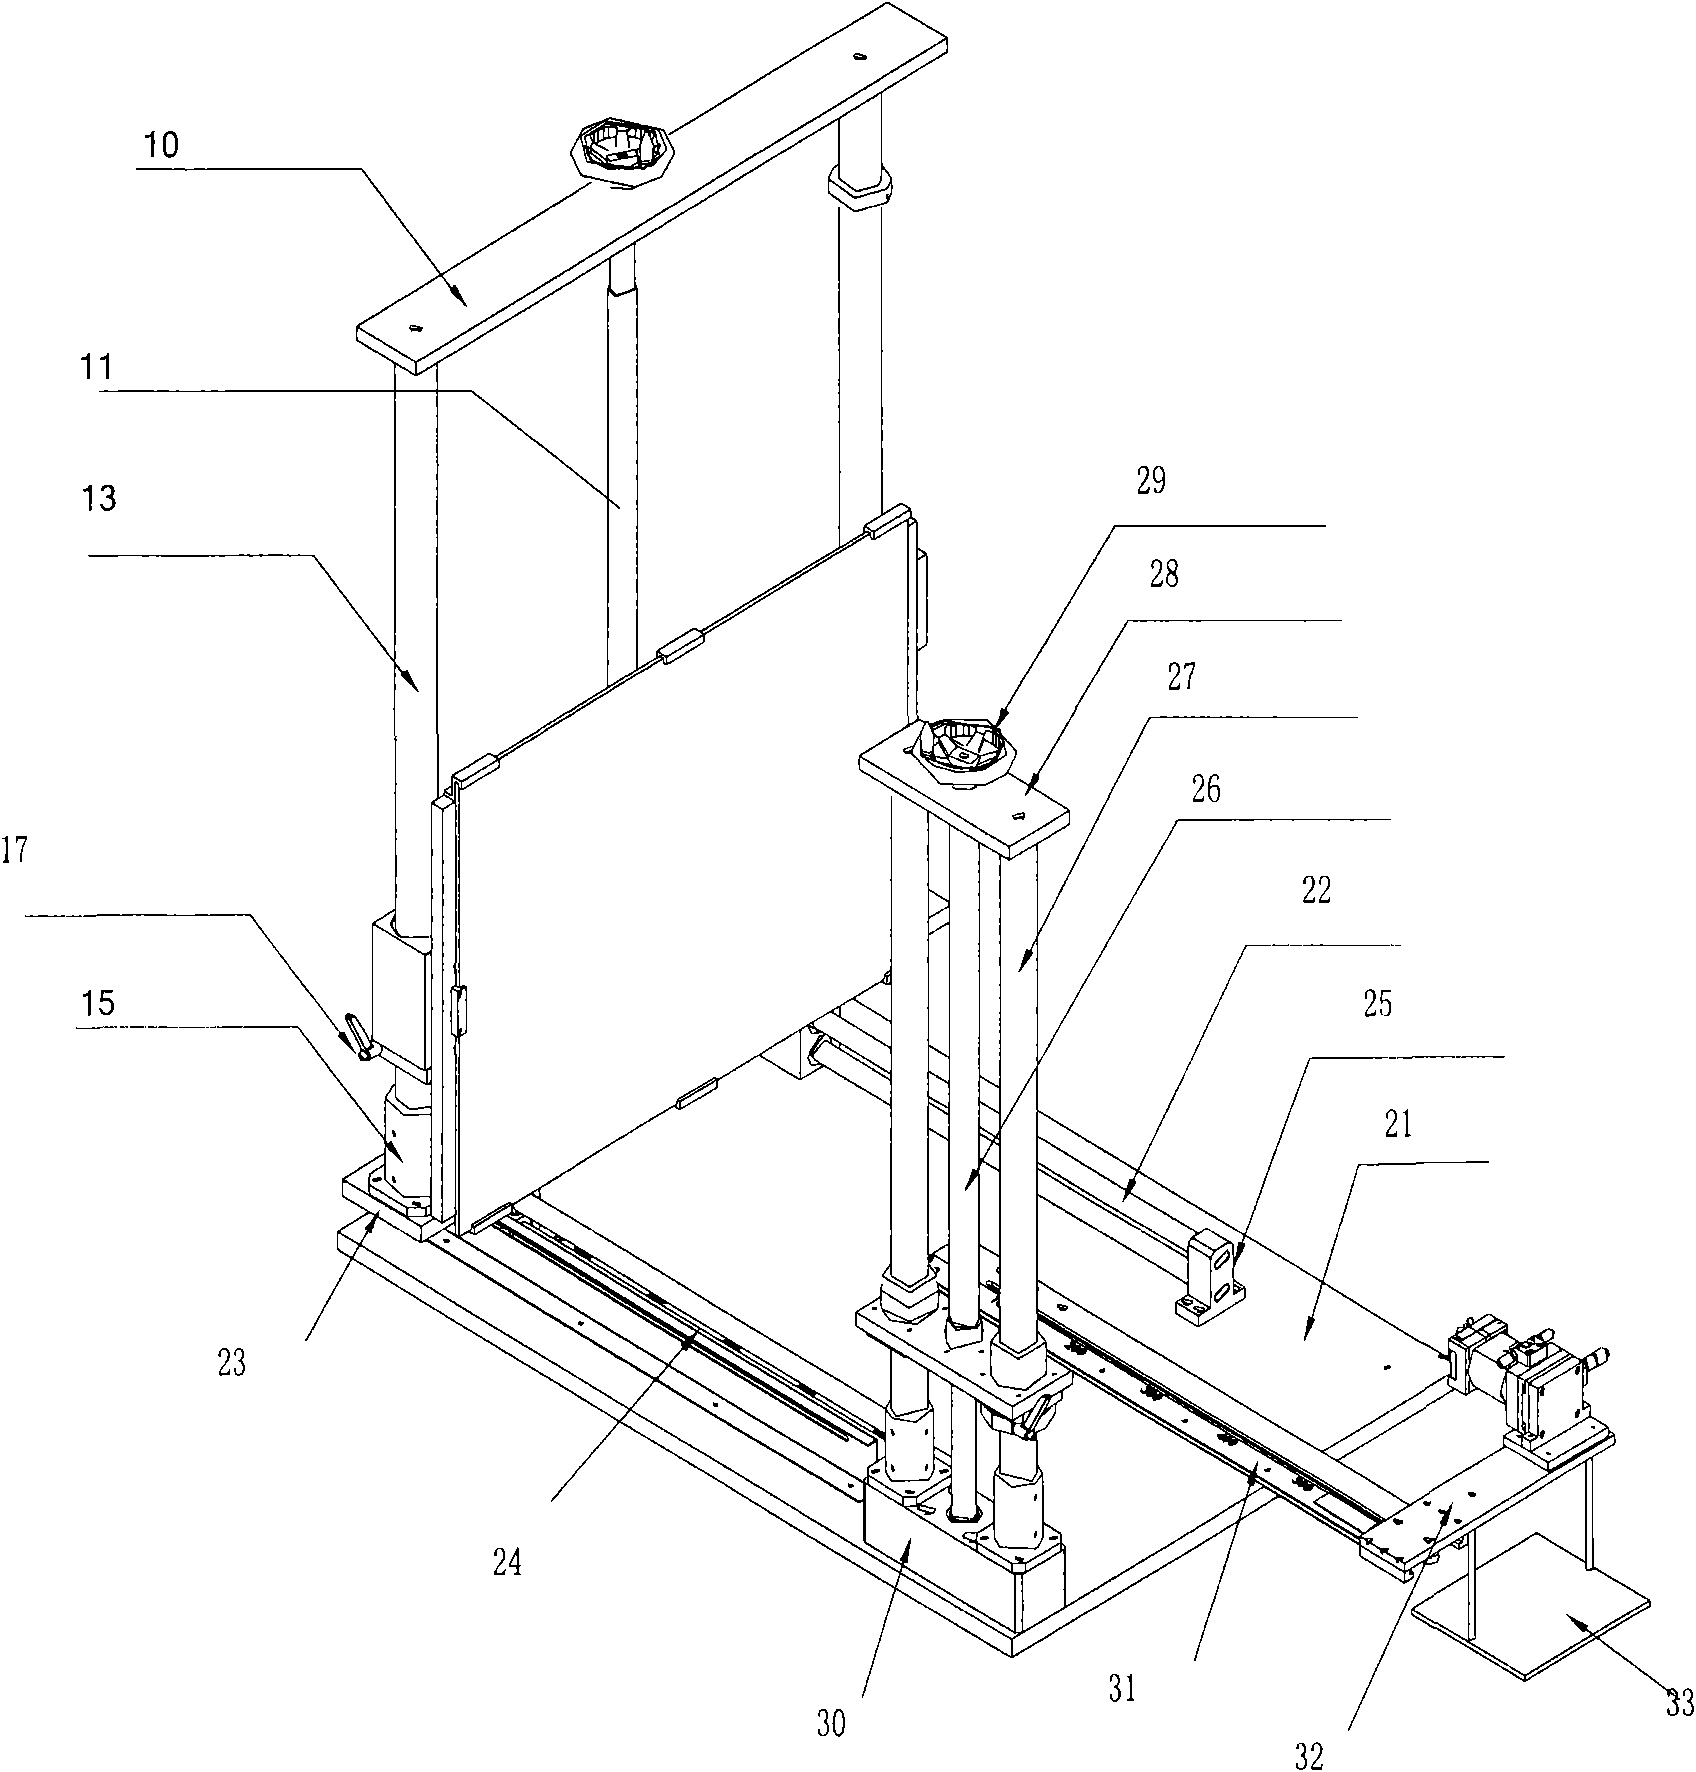 Camera detecting equipment and system